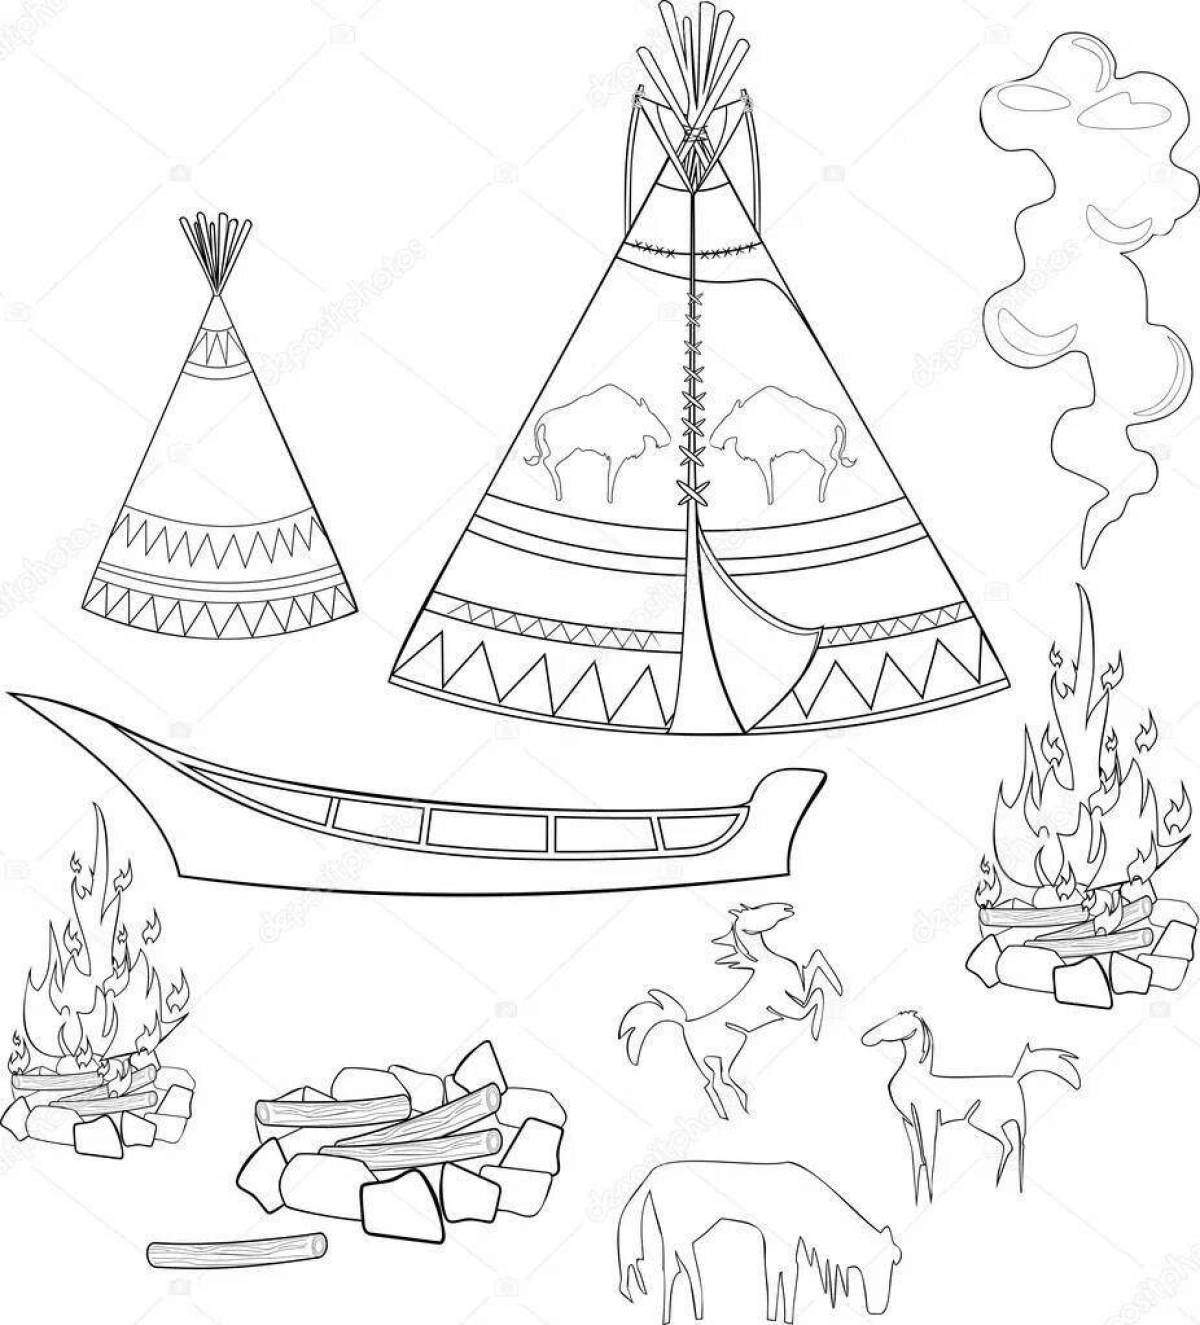 Charming wigwam coloring book